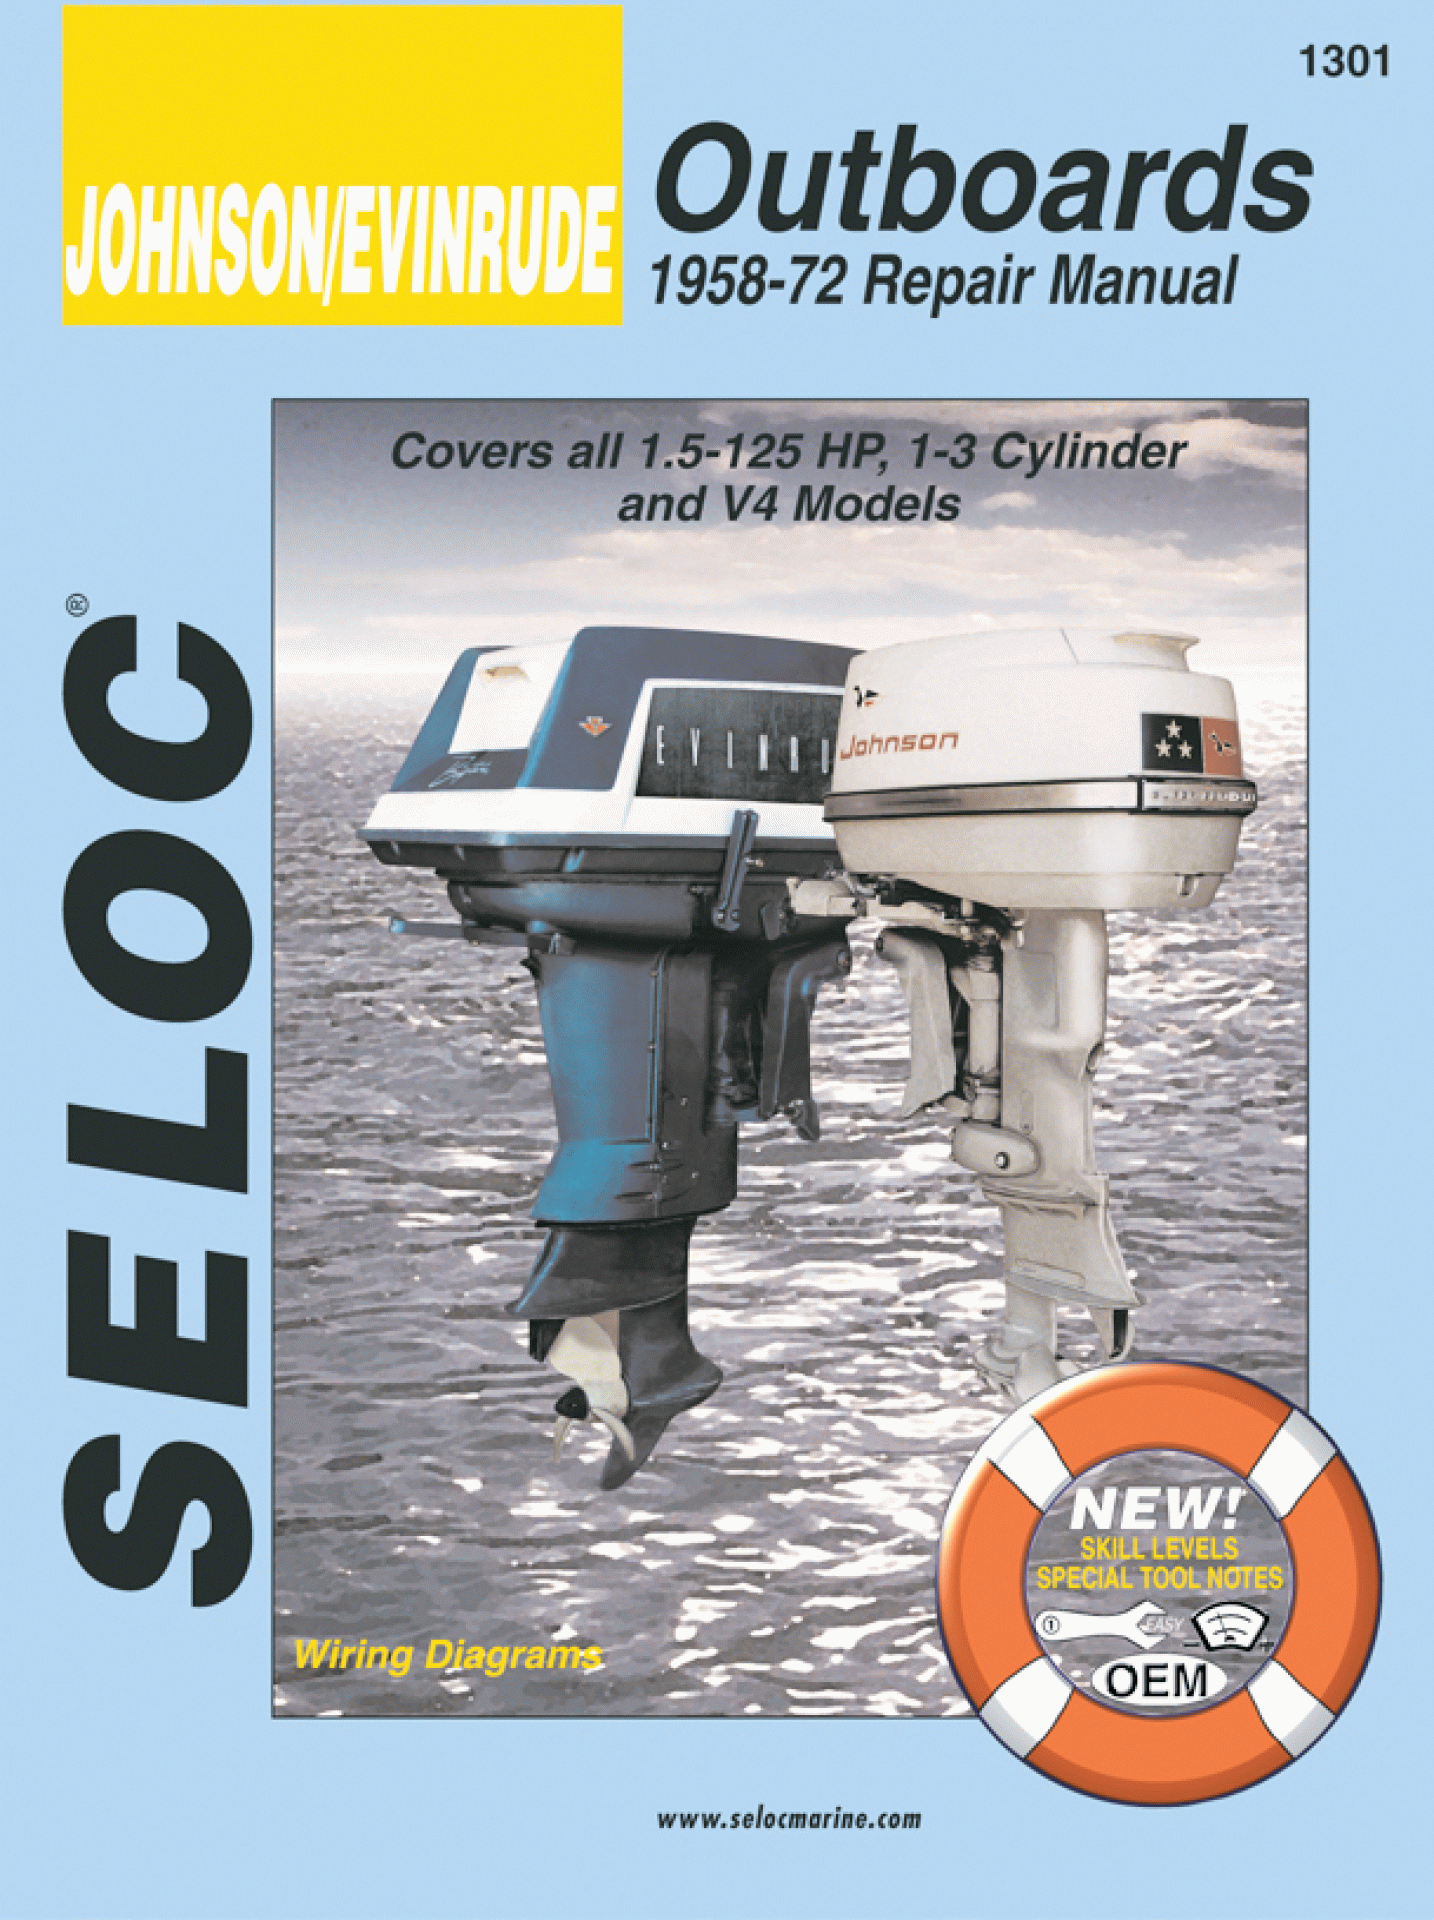 SELOC PUBLISHING | 18-01301 | REPAIR MANUAL Johnson/Evinrude Outboards 1-4 Cyl 1958-72